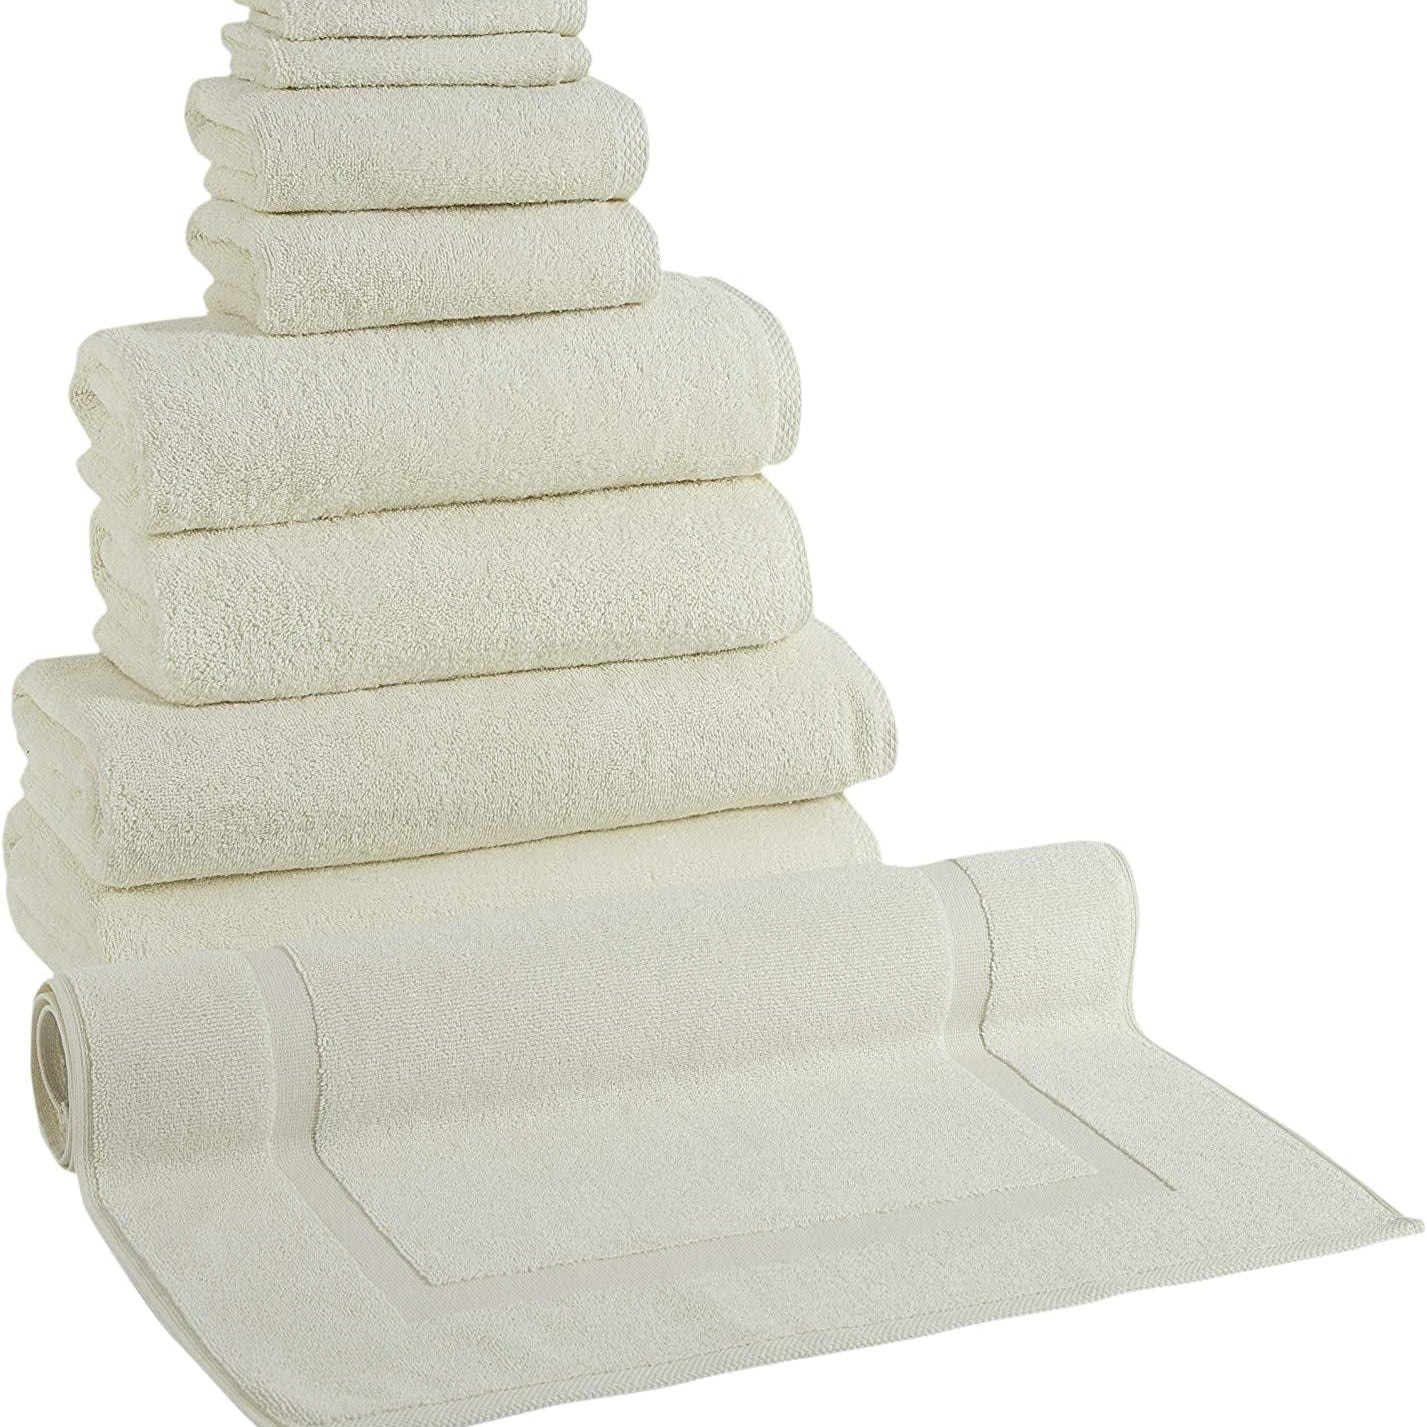 Classic-Turkish-Towels-Genuine-Cotton-Soft-Absorbent-Arsenal-9-Piece-Set-With-2-Bath-Towels,-2-Bath-Sheets,-2-Hand-Towels,-2-Washcloths,-And-A-Bath-Mat-Home-Goods